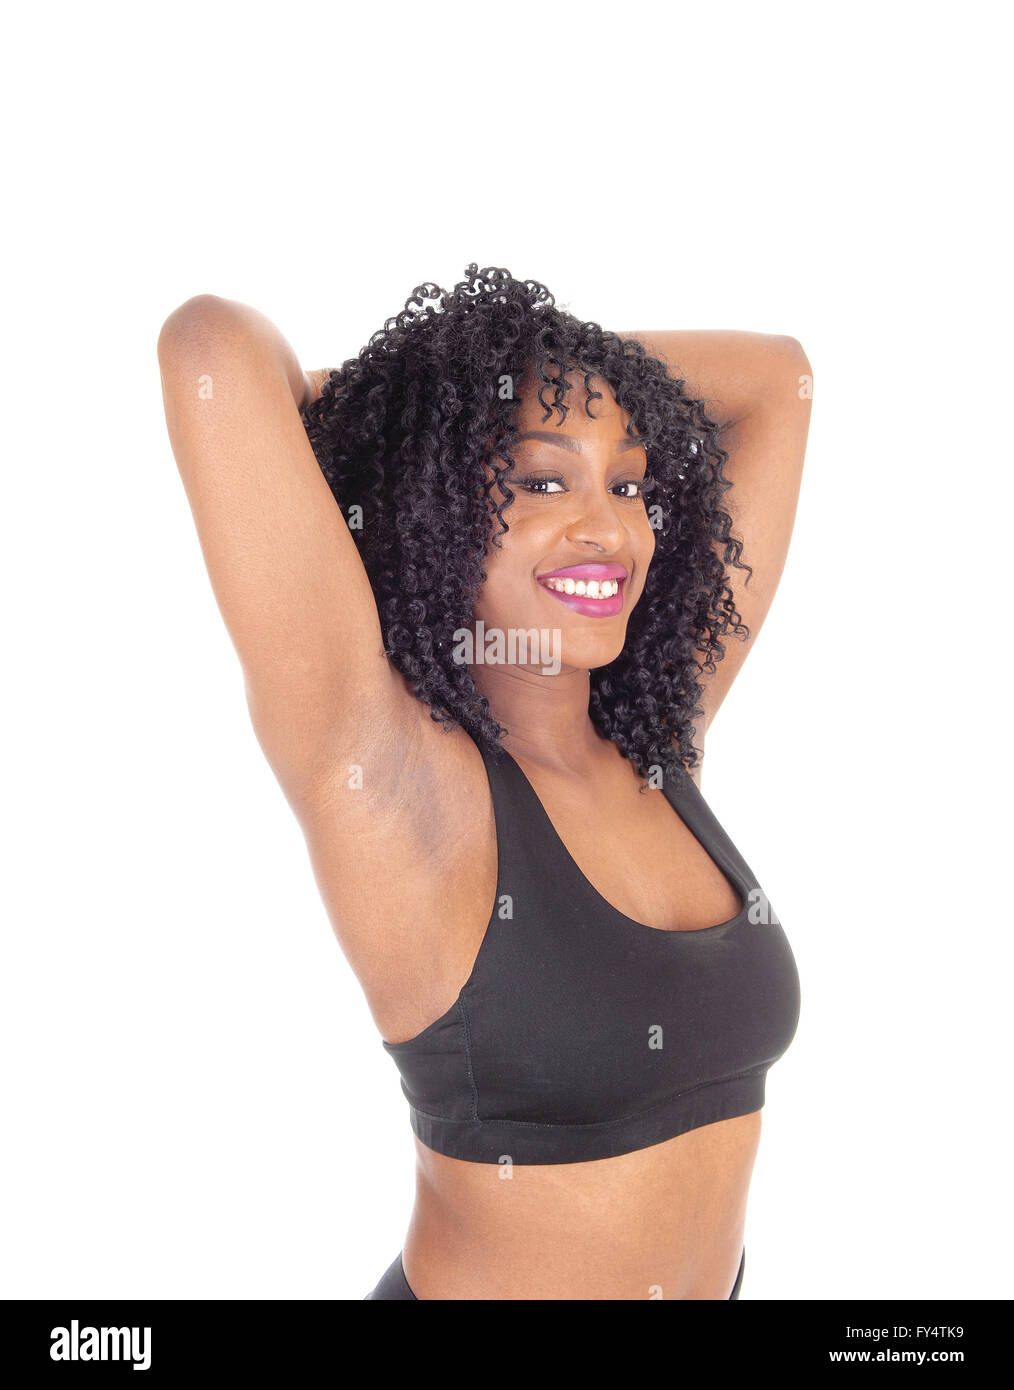 70+ Black Girls In Bras Stock Photos, Pictures & Royalty-Free Images -  iStock